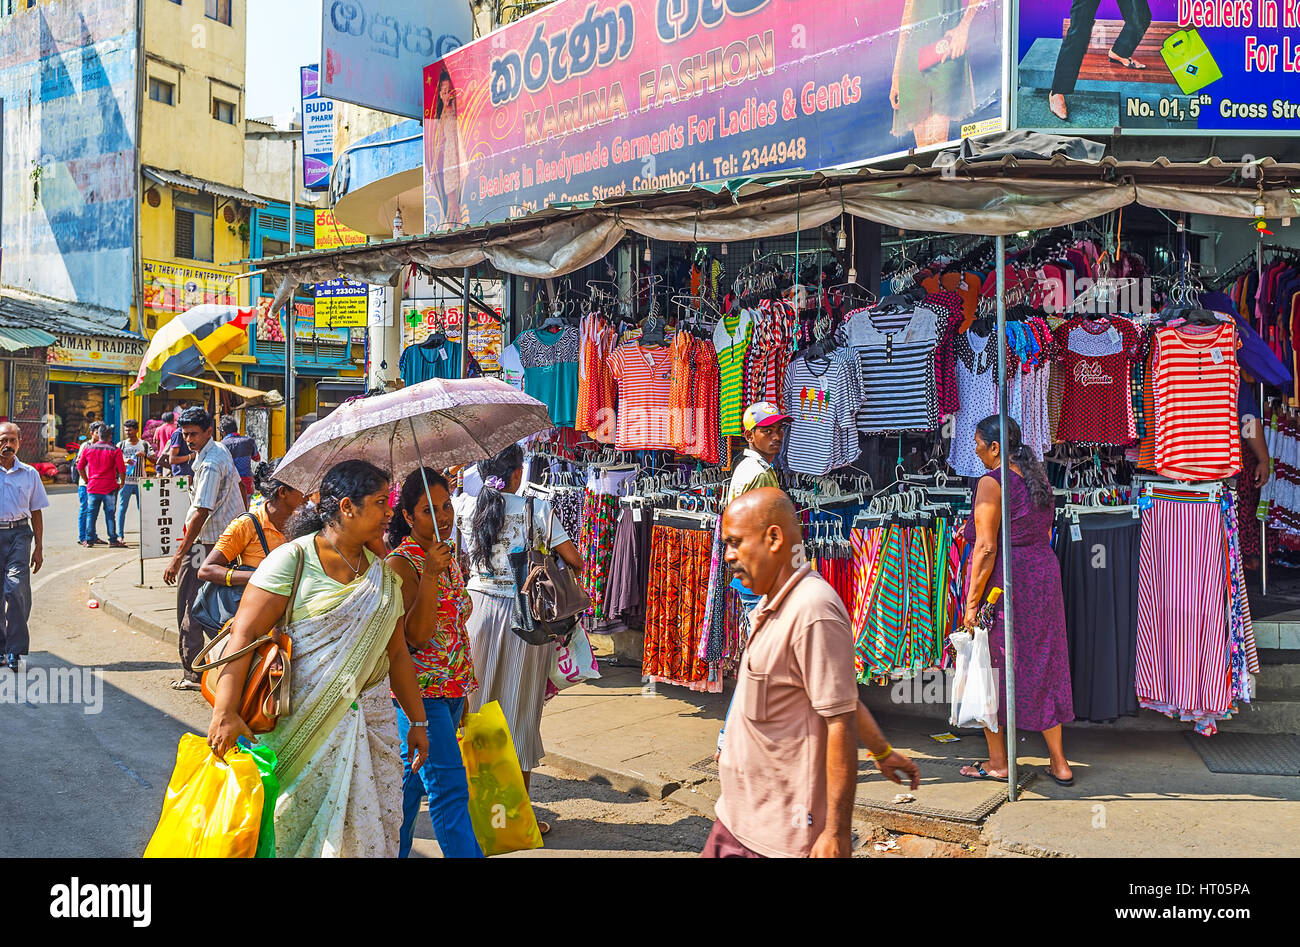 COLOMBO, SRI LANKA - DECEMBER 6, 2016: The cheap clothes market in 5th Cross street of Pettah district attracts locals and tourists, visiting the city Stock Photo